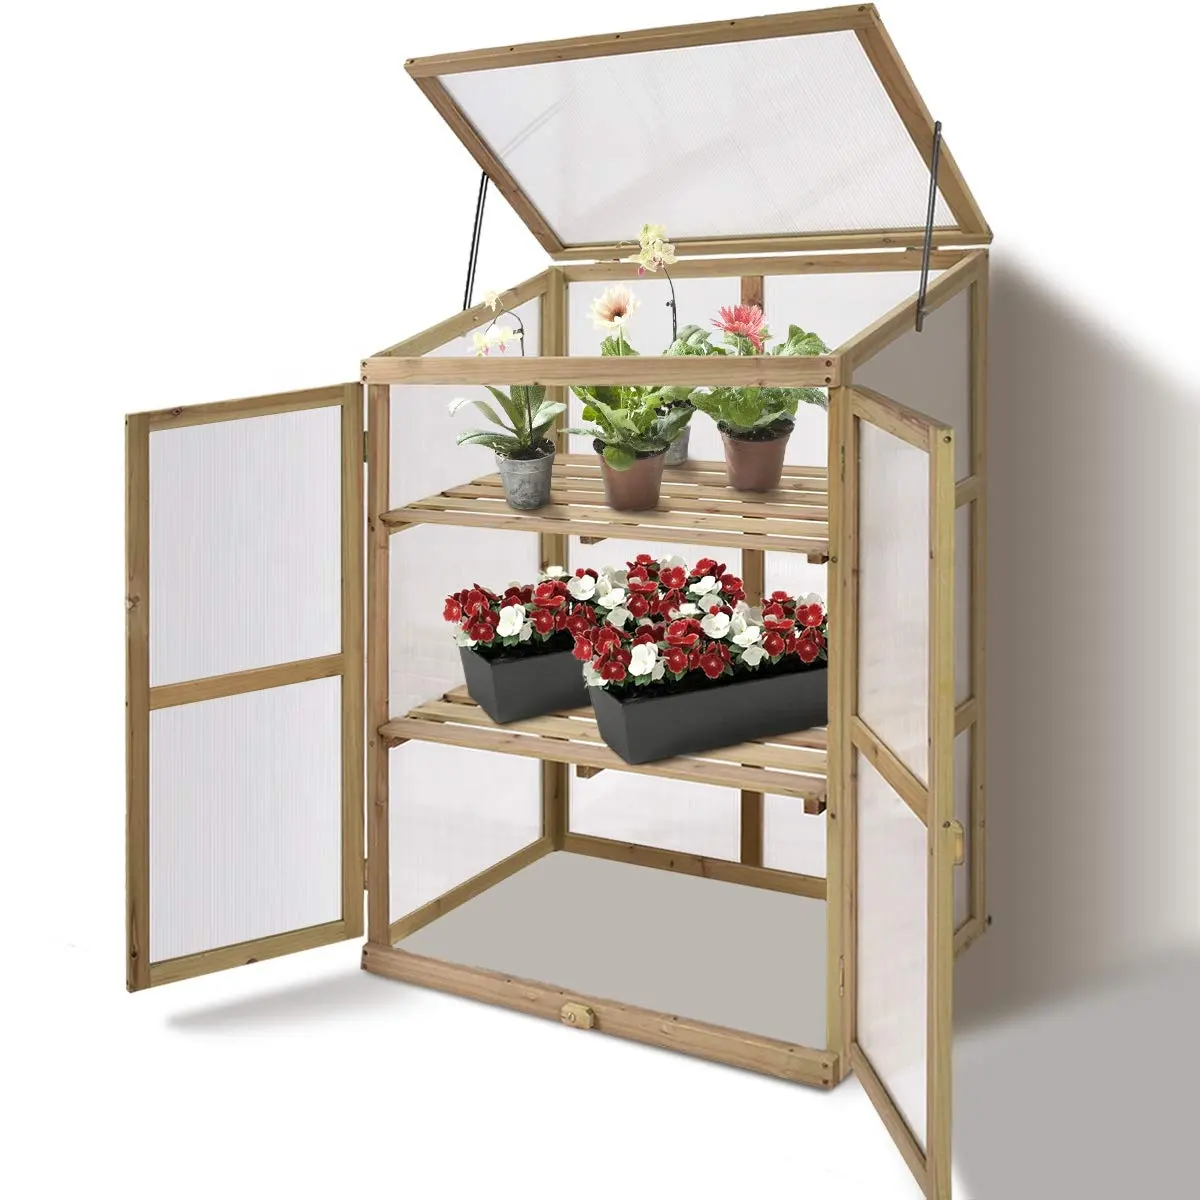 Raised Flower Planter Protection Grow Green House Garden Portable Wooden Cold Frame Greenhouse